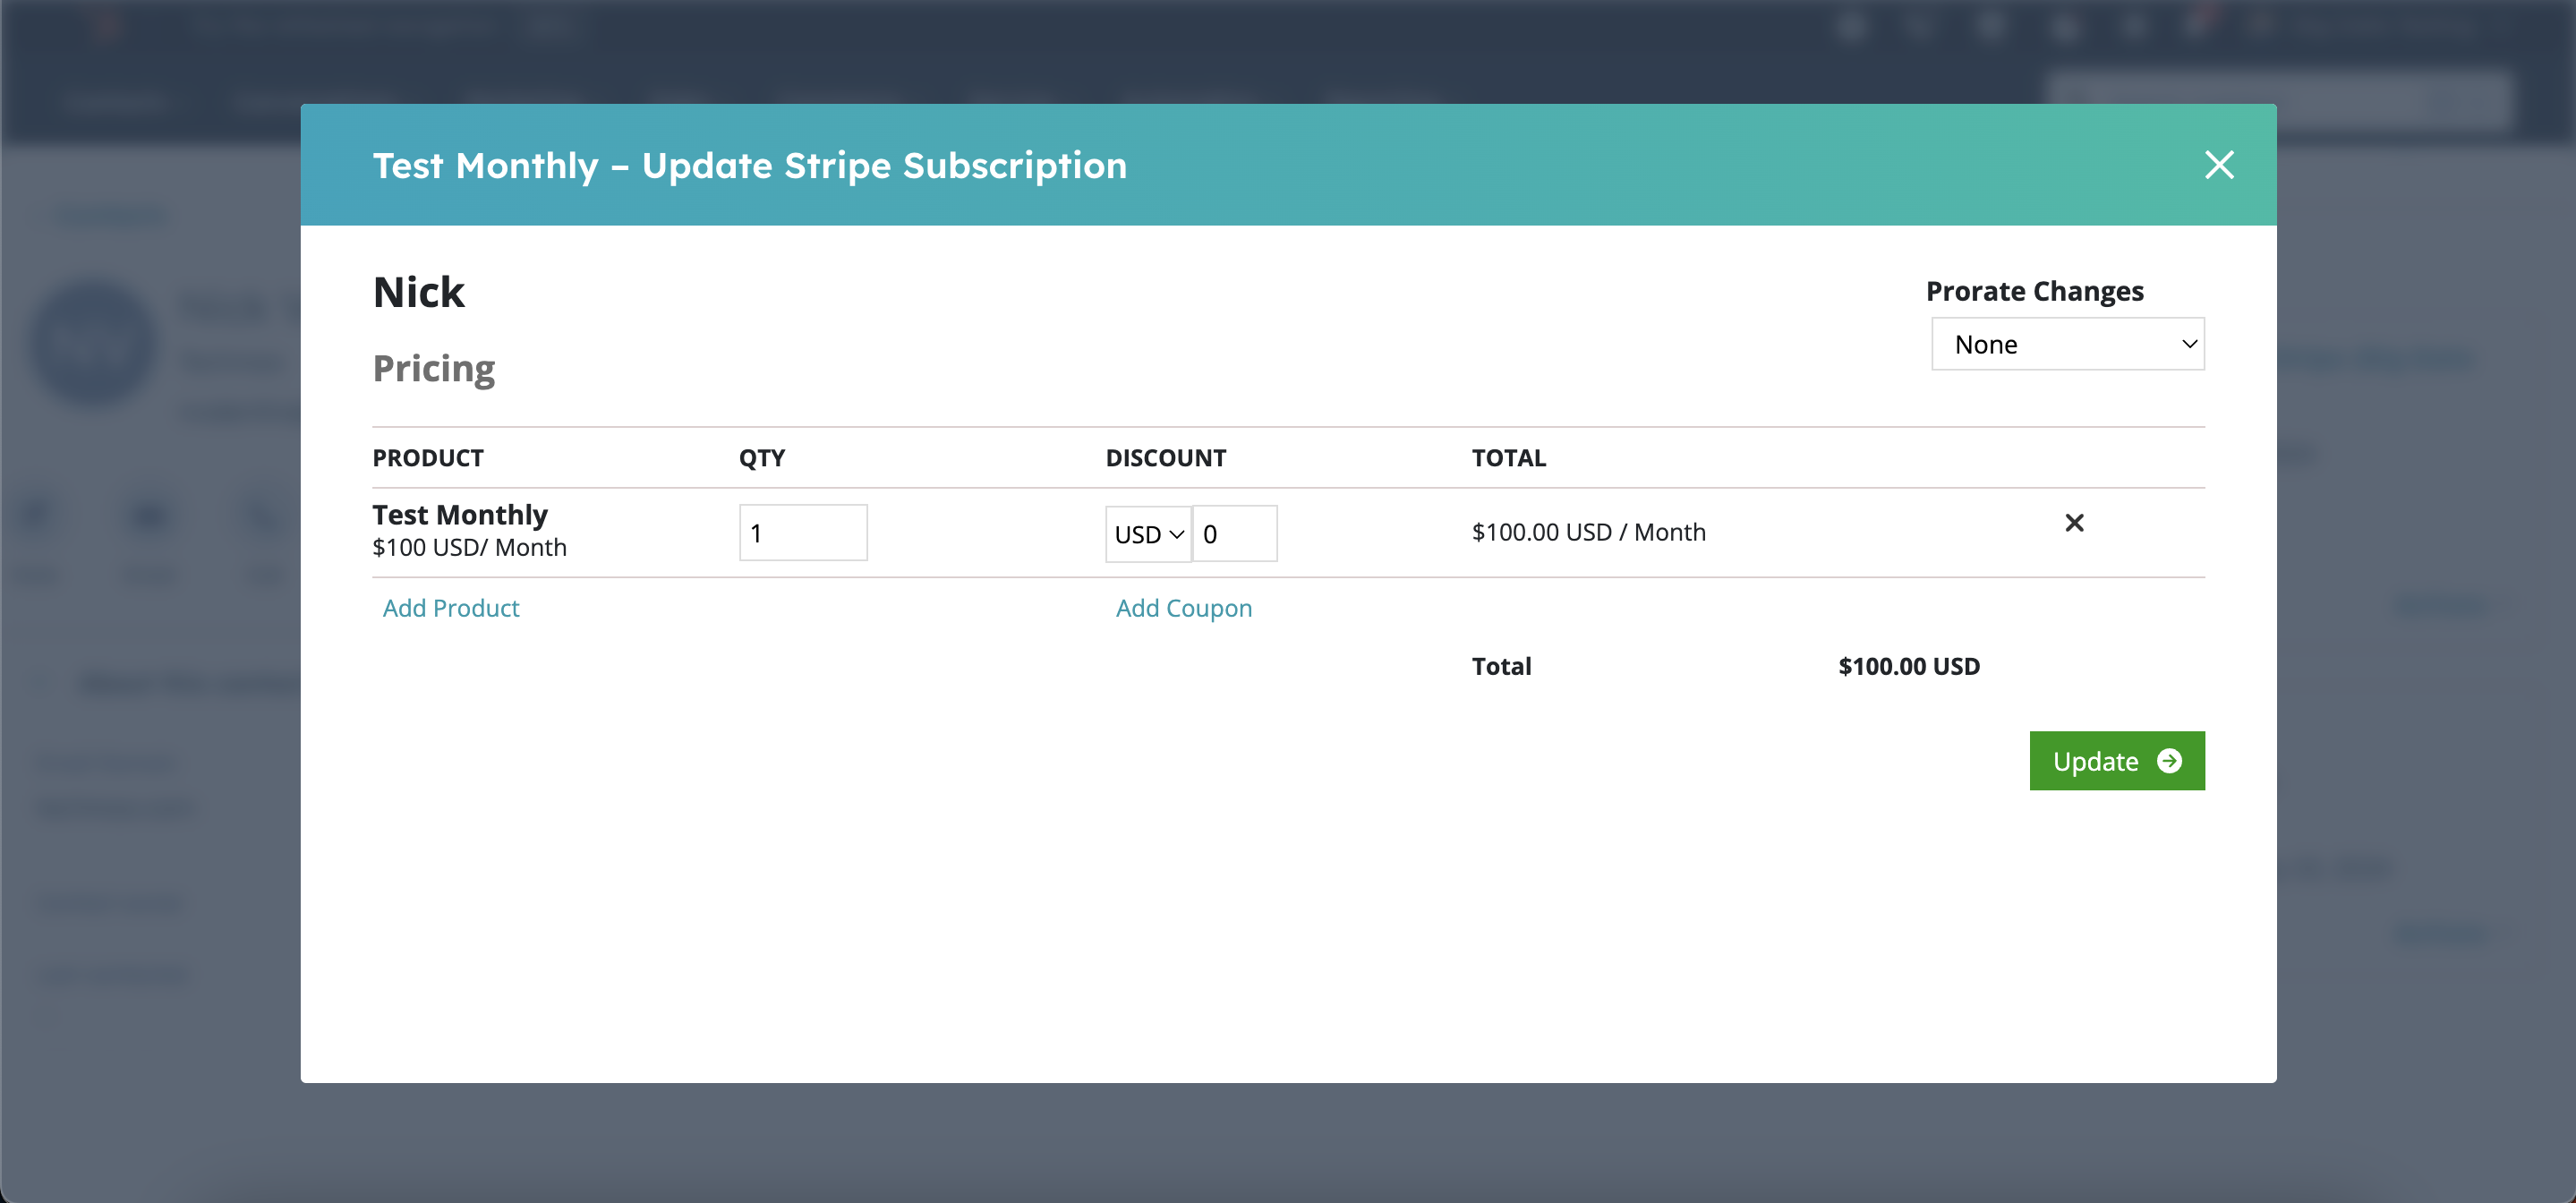 Updating stripe subscription from within HubSpot